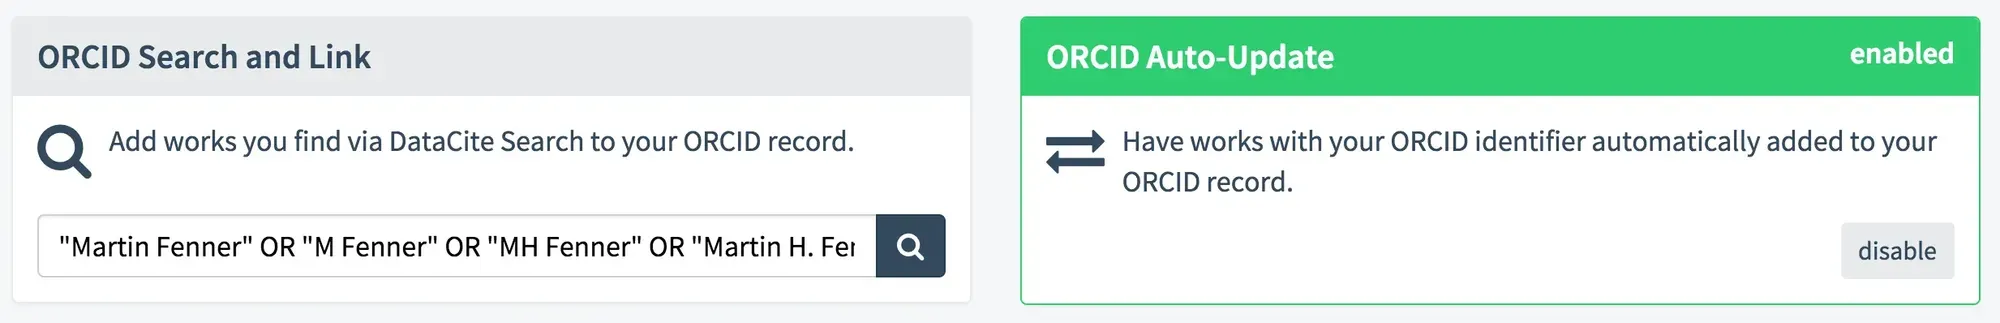 ORCID Auto-Updated